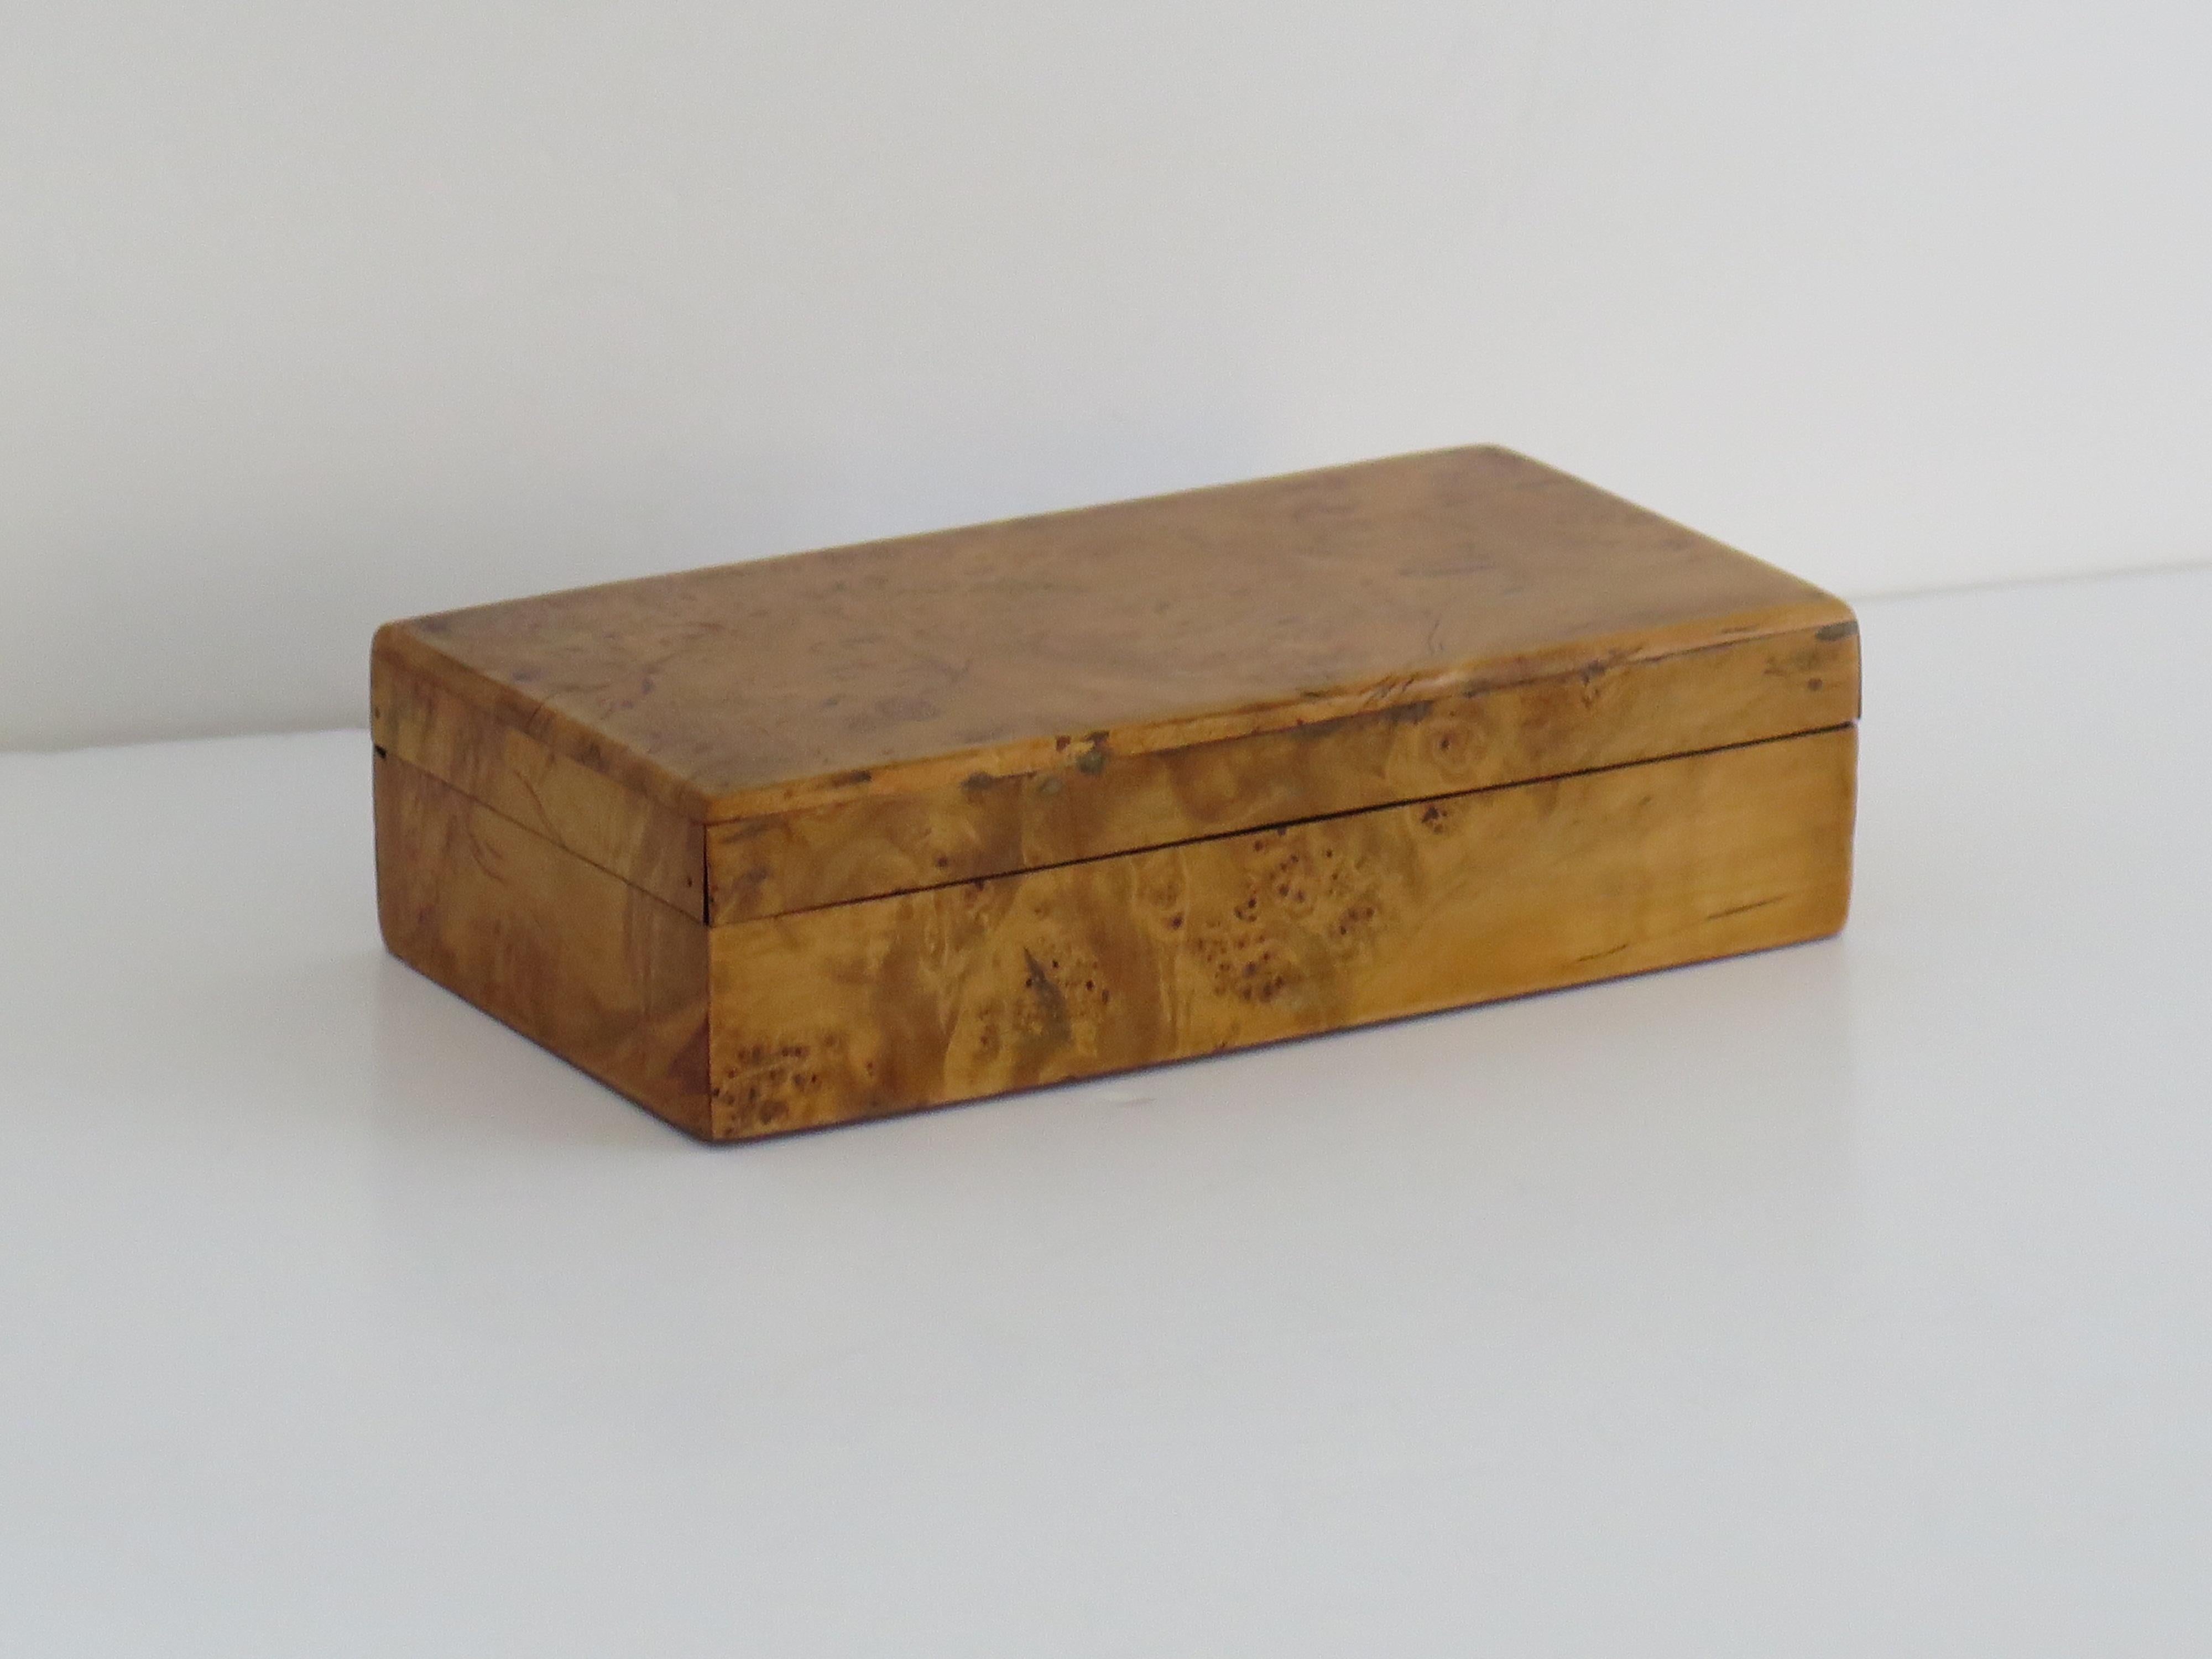 This is a good quality Art Deco period lidded Box, of Birds-Eye Maple veneer, probably French in origin and dating to circa 1925.

The box has a rectangular shape with a fitted hinged lid, all in birds-eye maple.

This box is very well made of a